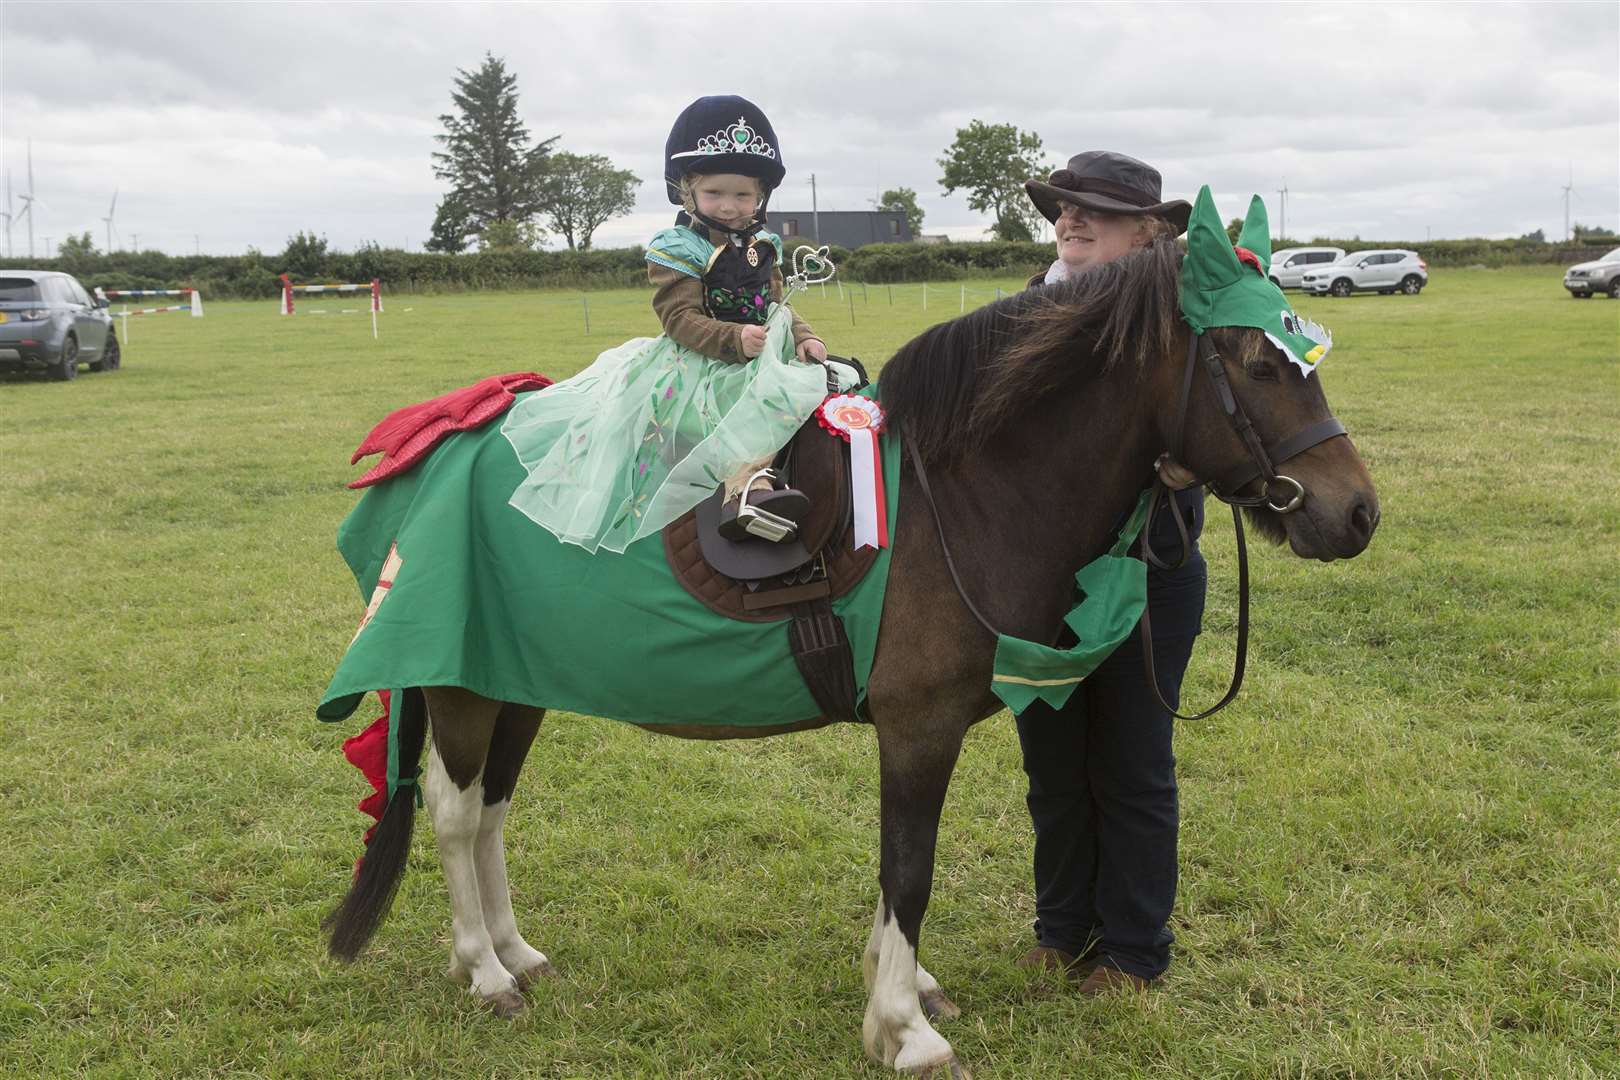 Four-year-old Abbie Burt and her pony Merlin won the ridden fancy dress competition, as a dragon and princess. Abbie, who is seen here with her mum, Sarah Sturrock, lives in Argyle Square, Wick. Picture: Robert MacDonald/Northern Studios